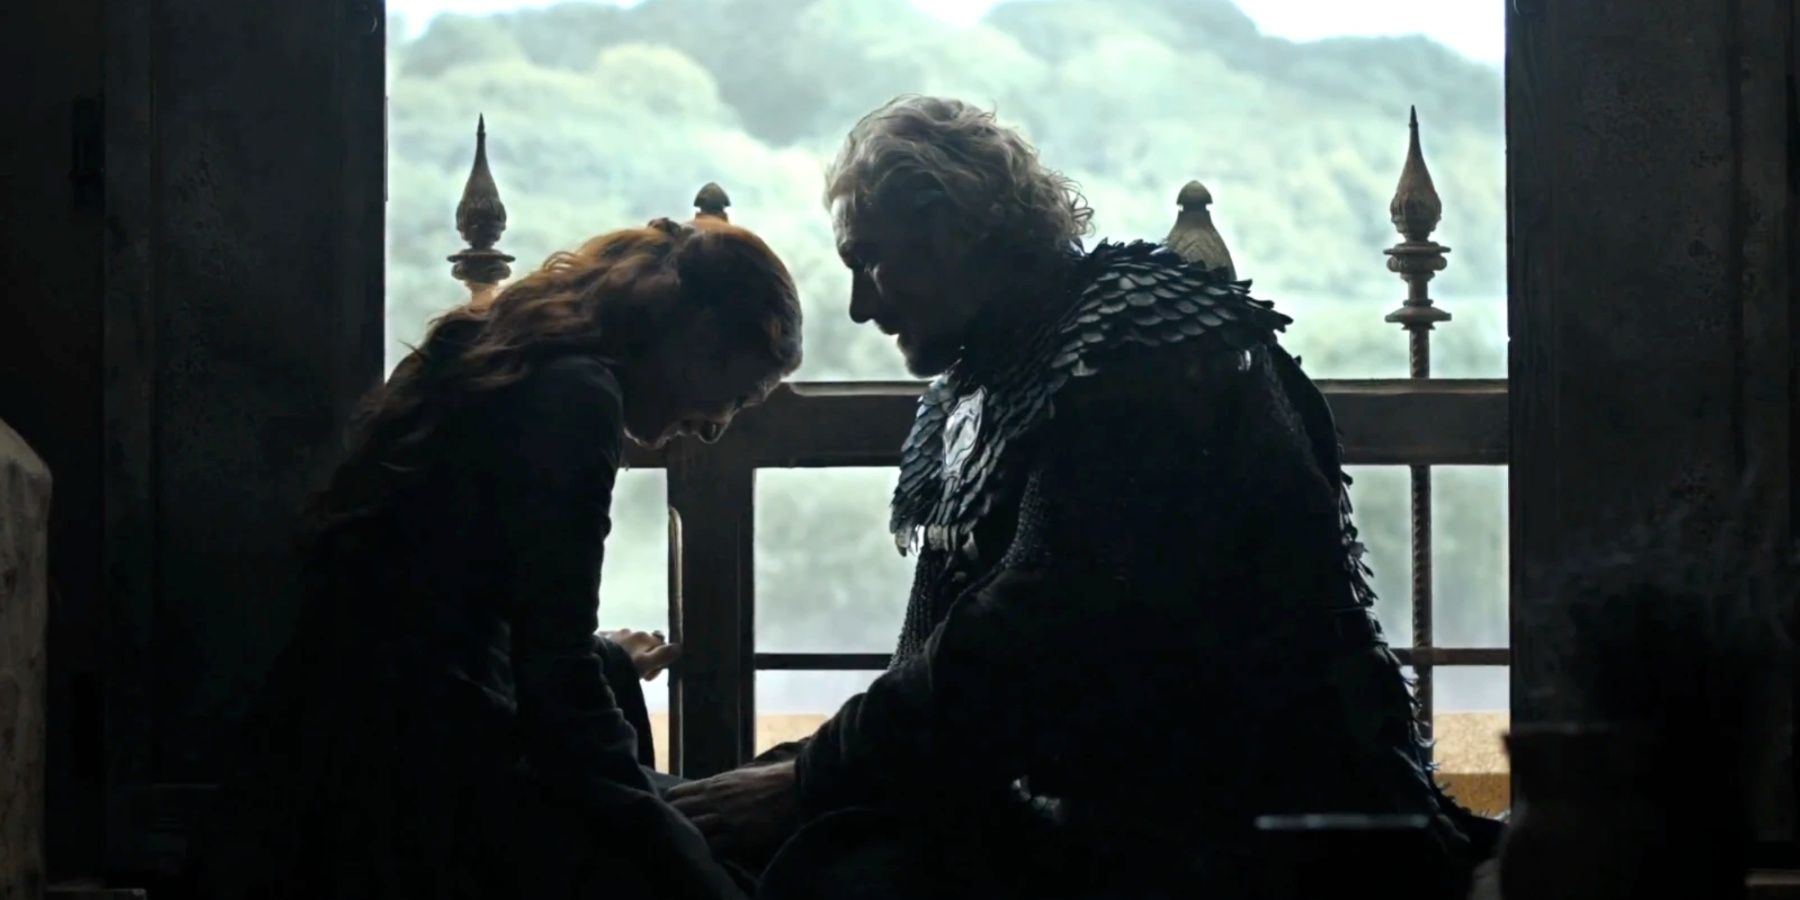 Catelyn and her uncle Brynden Tully in Game of Thrones.